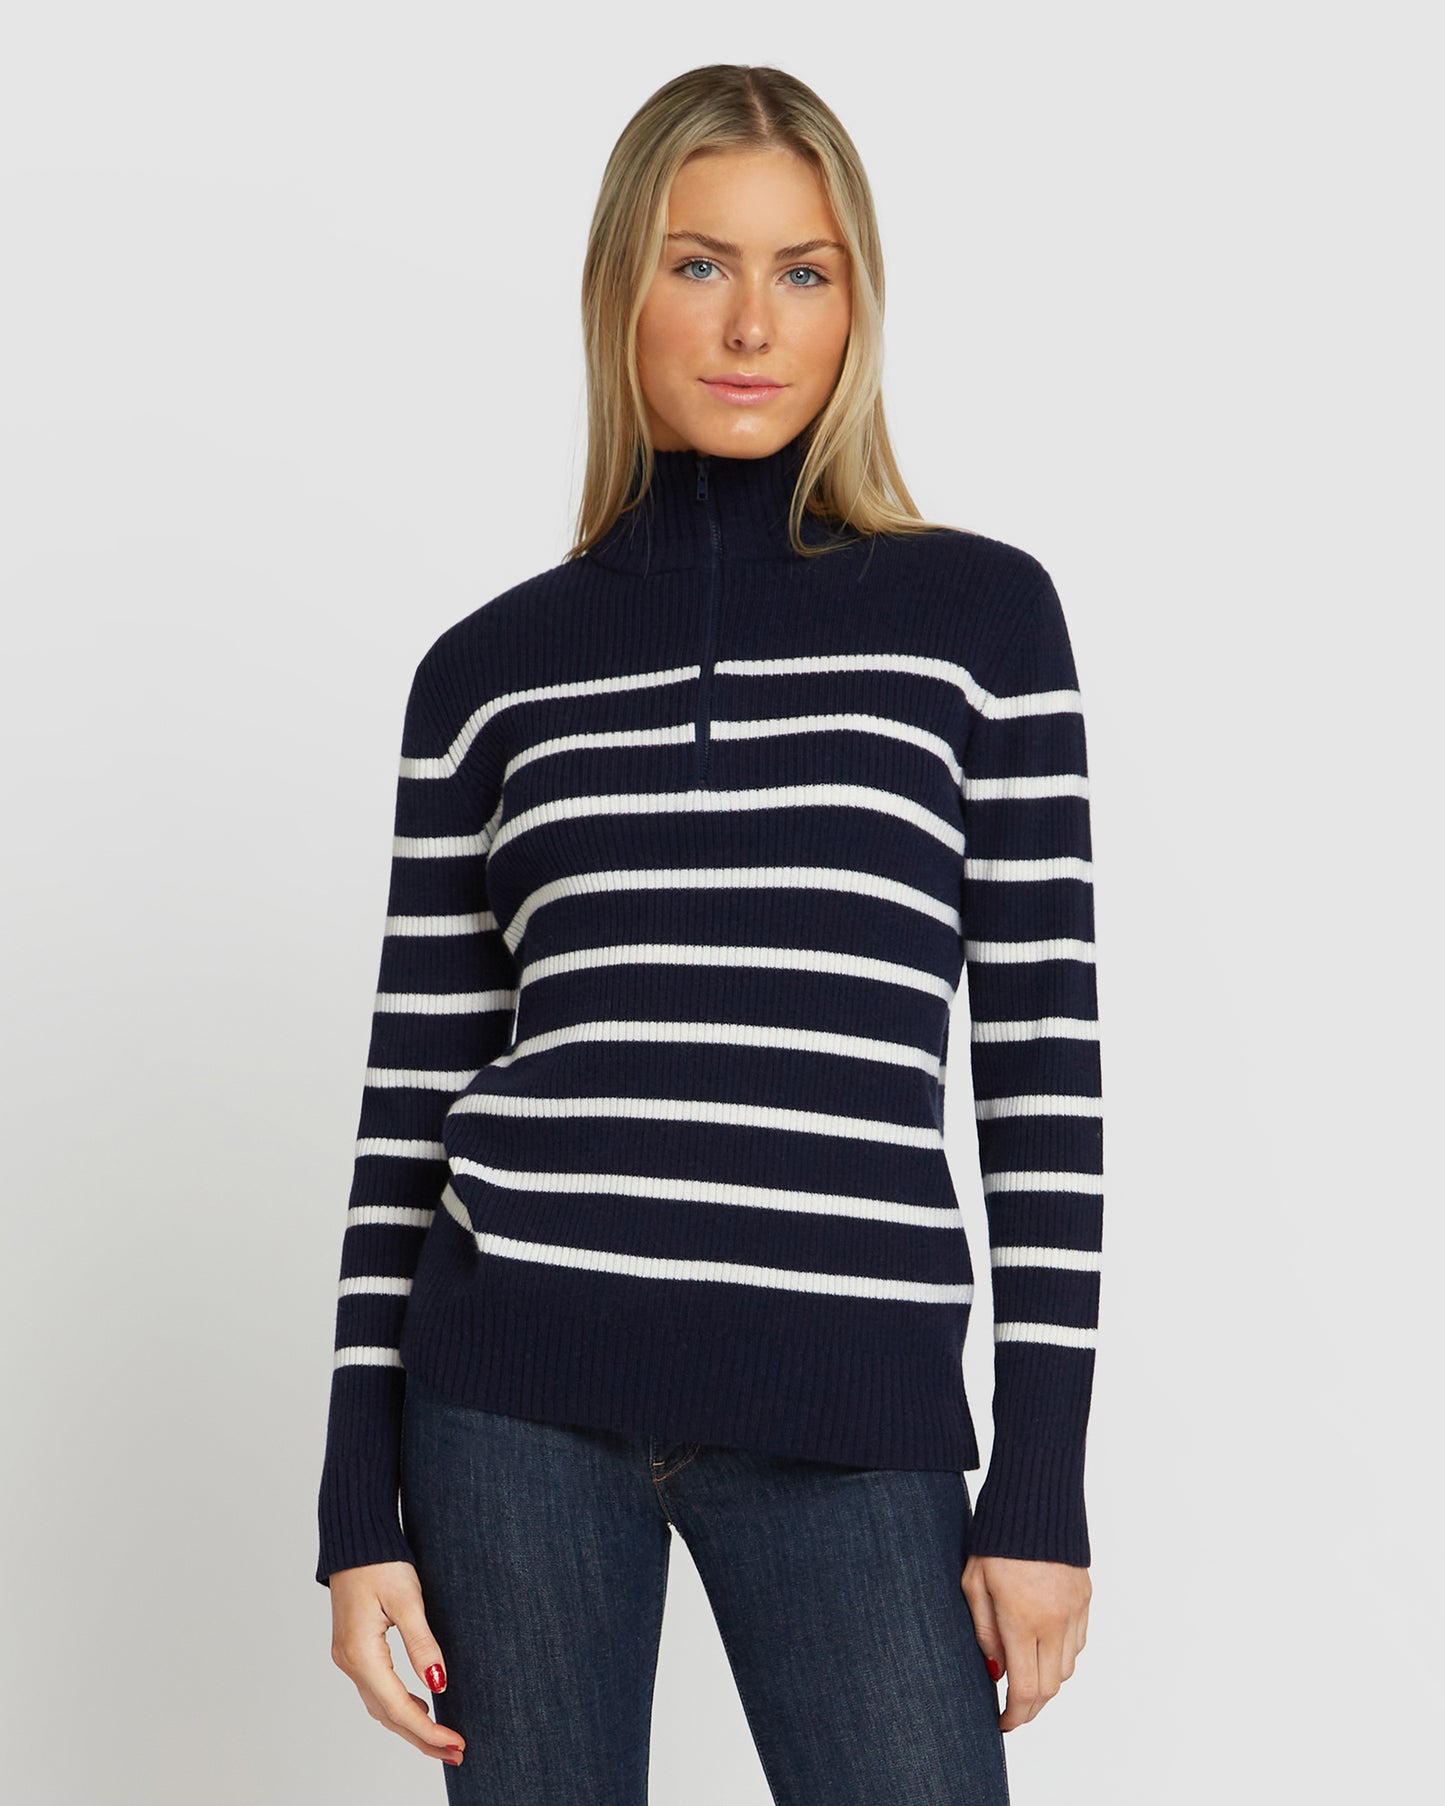 The Breton - A Marker Of Classic French Style